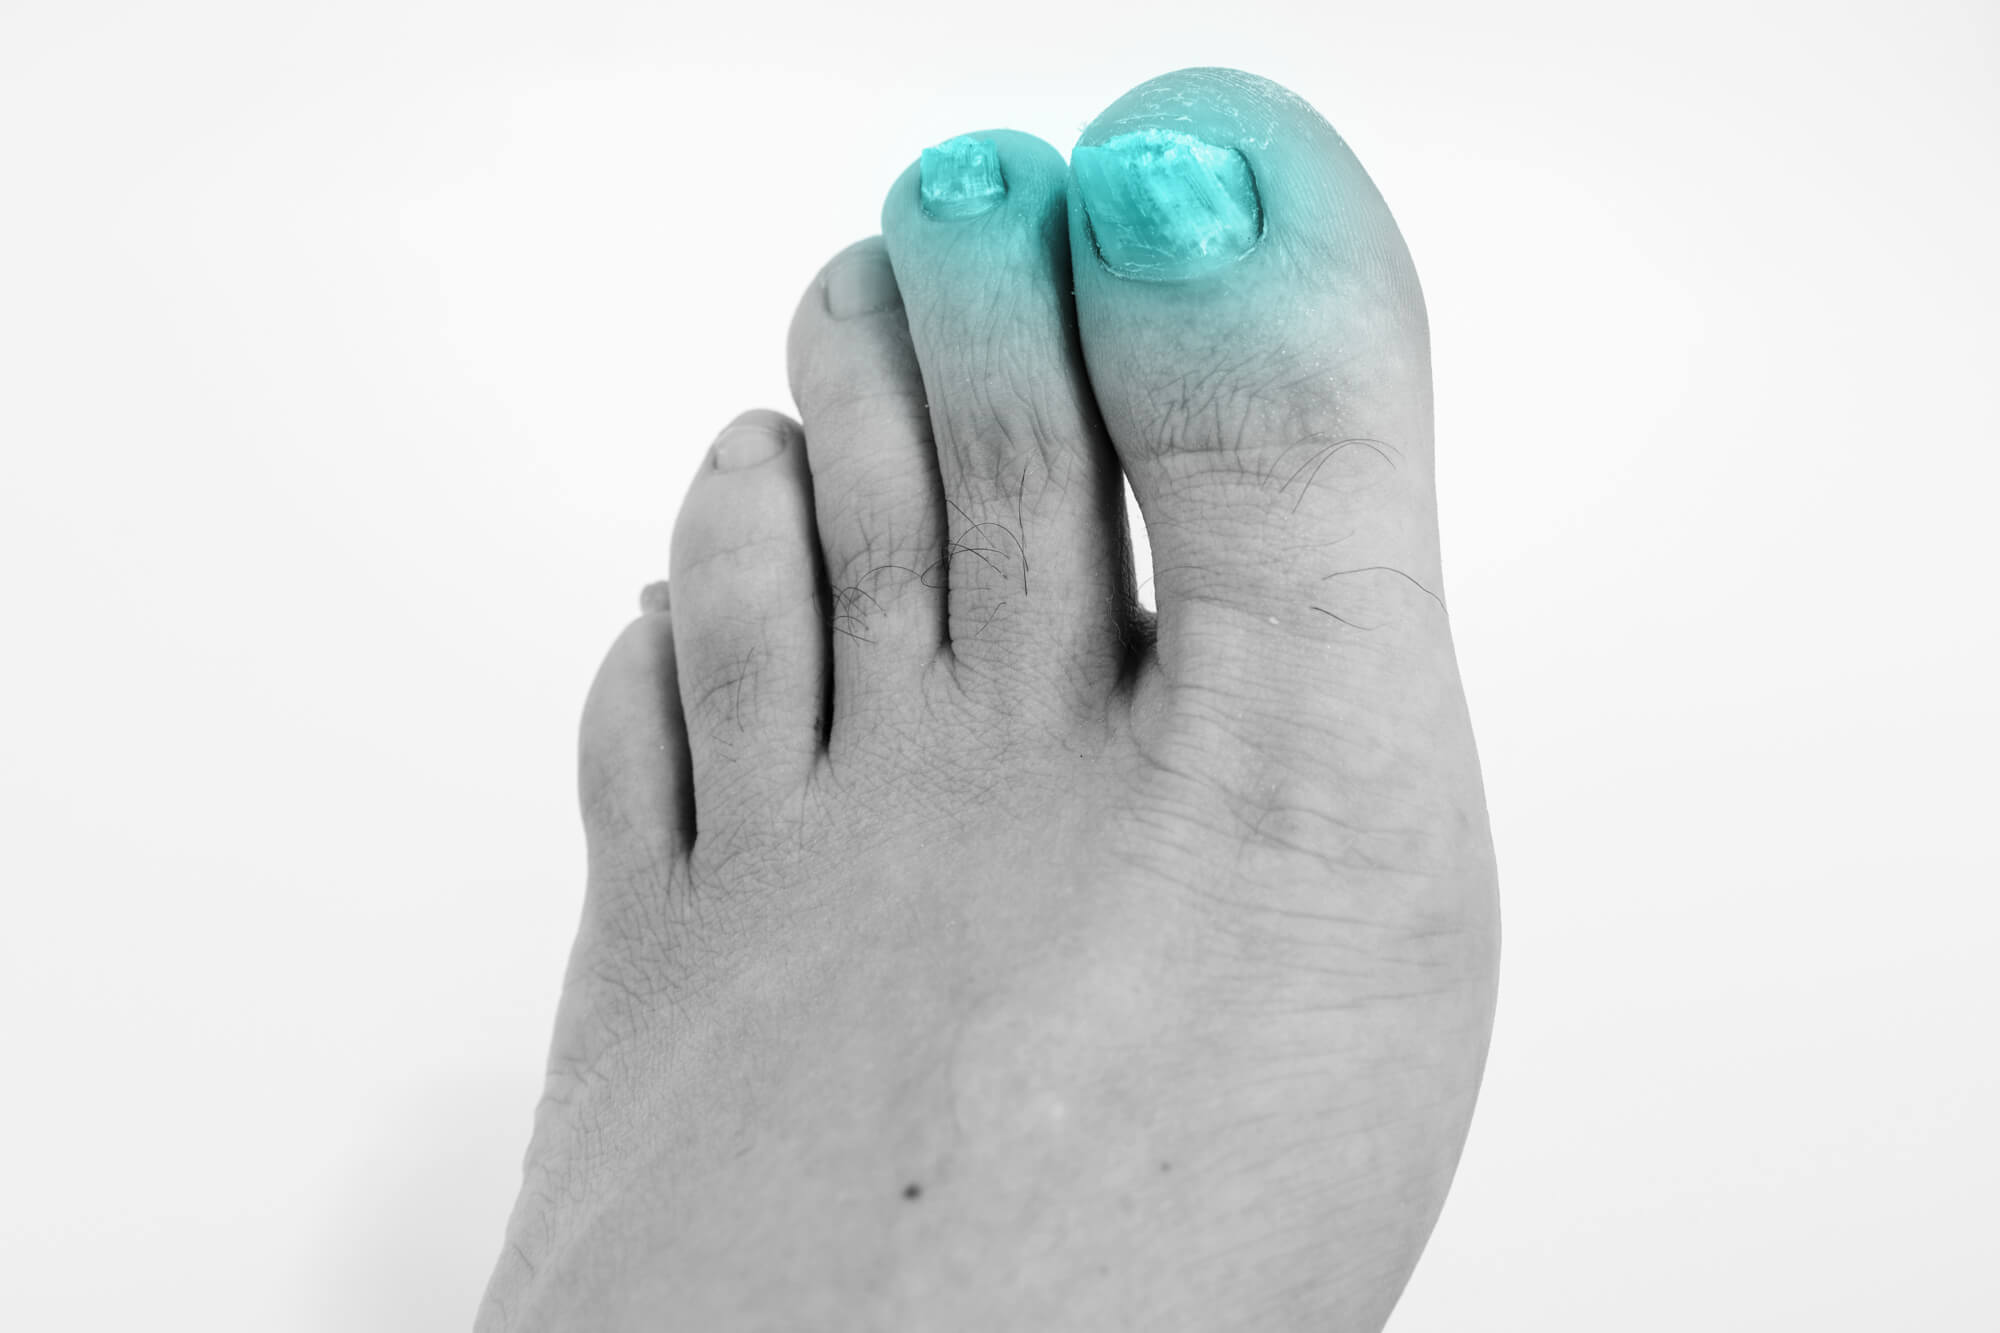 causes-of-thick-toenails